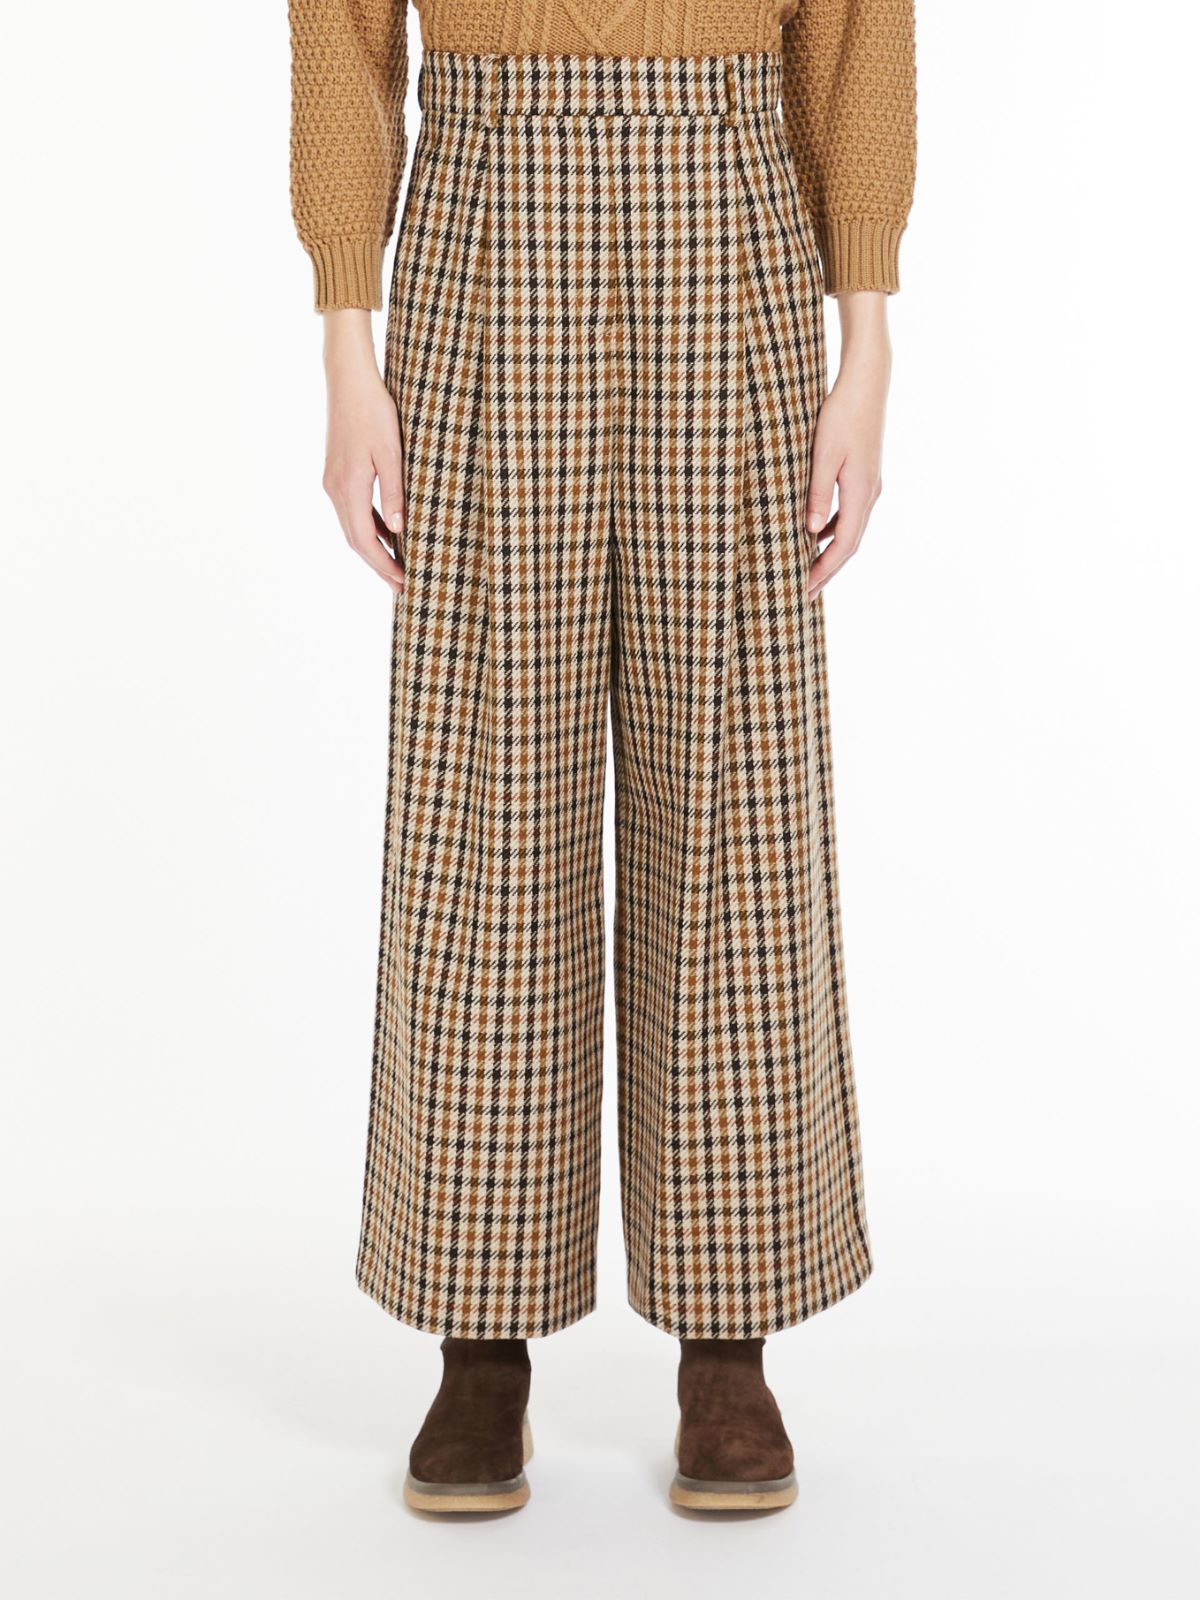 Wool and cotton trousers - BROWN - Weekend Max Mara - 2